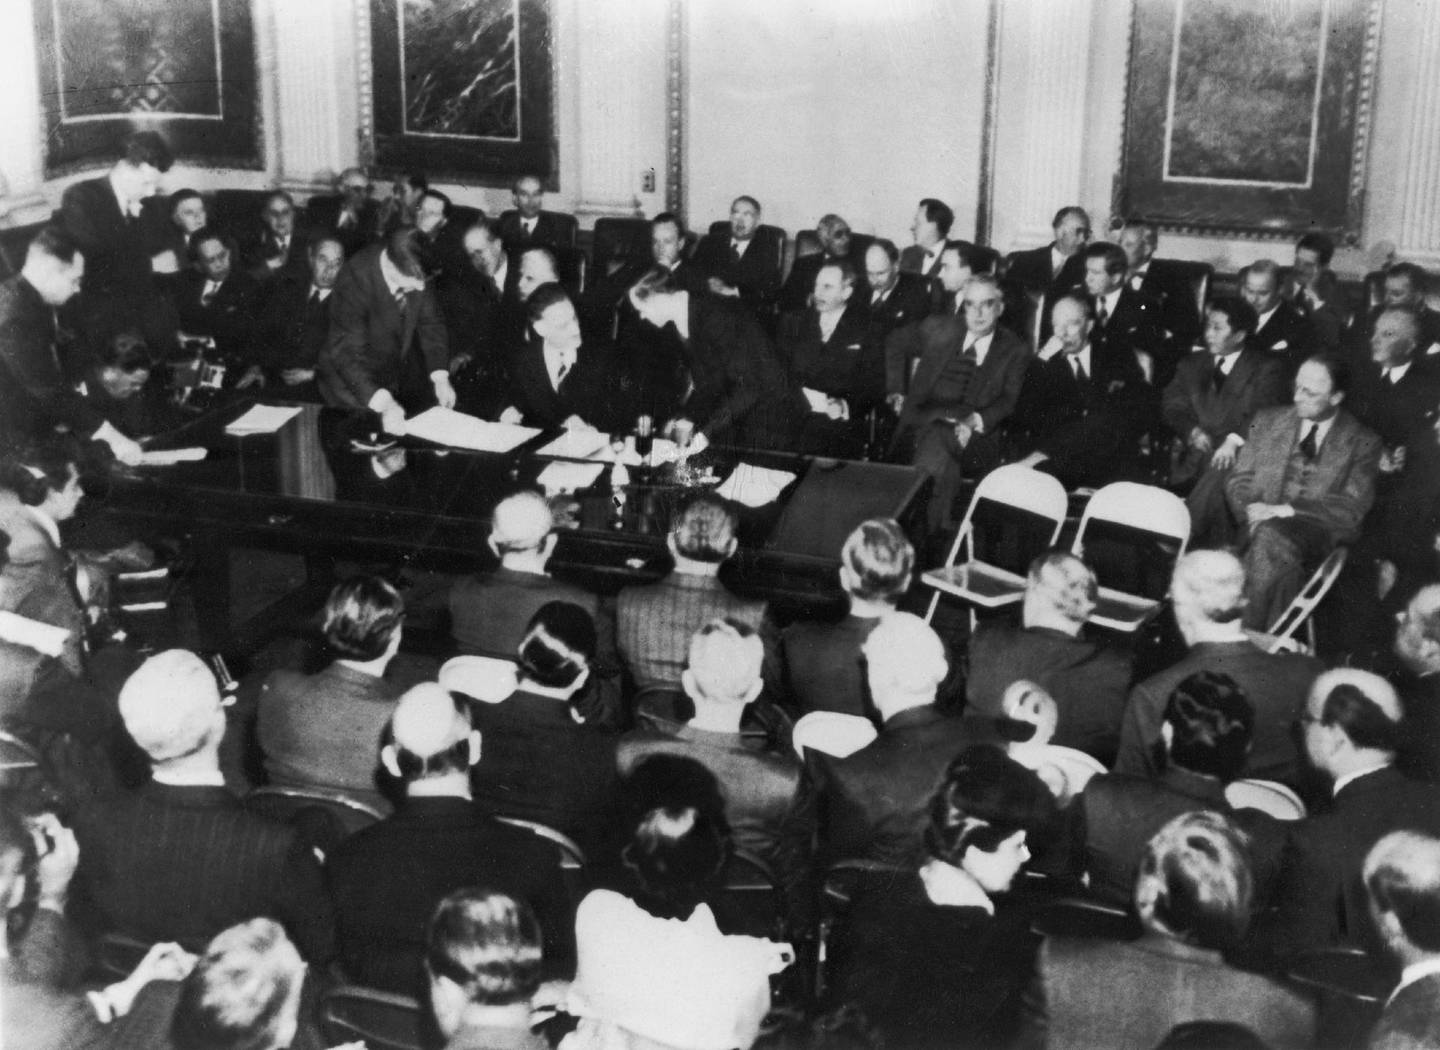 UNITED STATES - JULY 01:  Signing Of Bretton Woods Agreements In July 1944.  (Photo by Keystone-France/Gamma-Keystone via Getty Images)